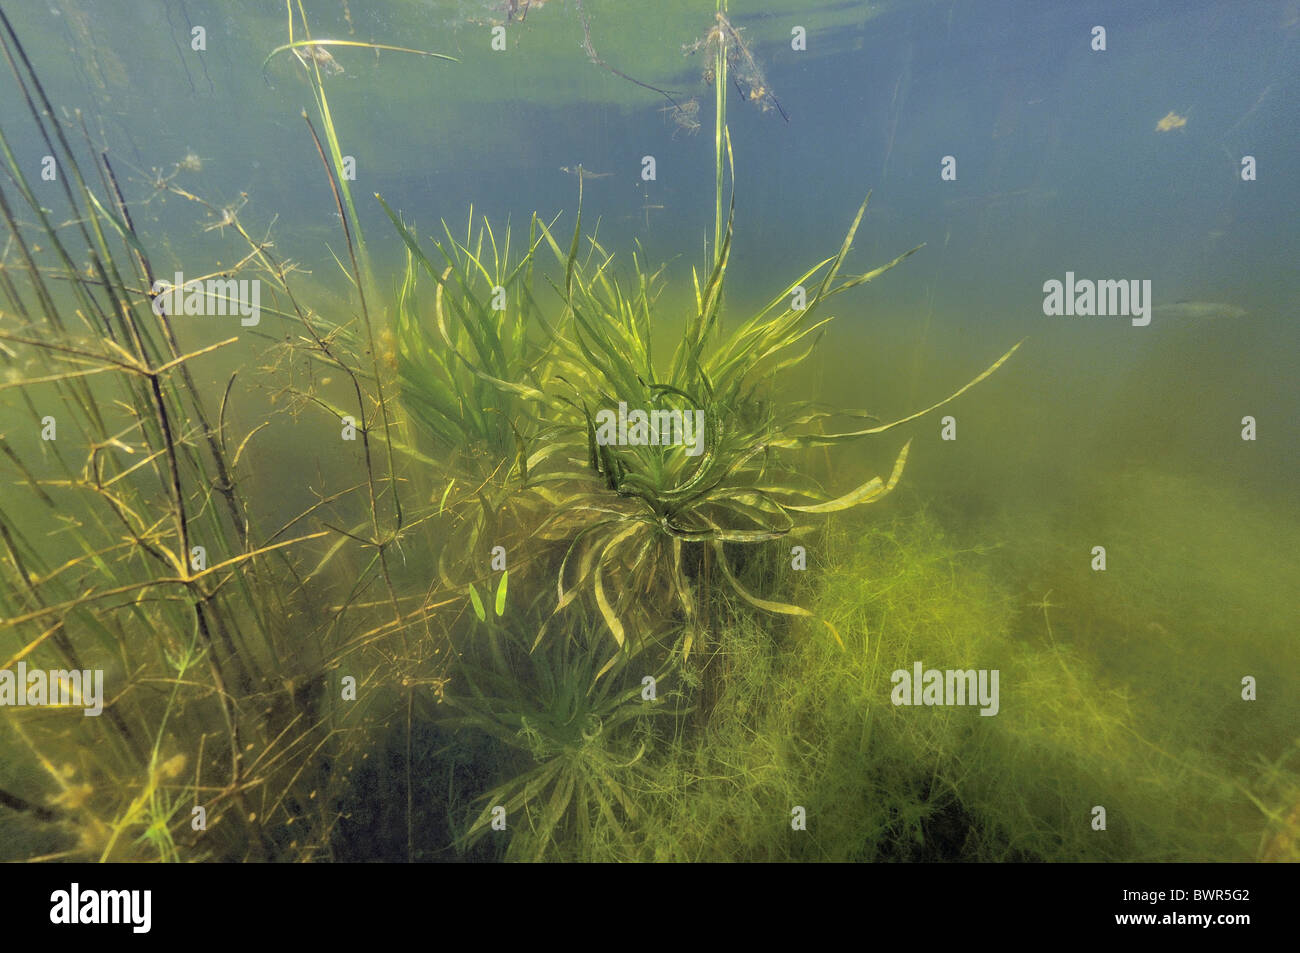 Water-soldier - Water pineapple (Stratiotes aloides - Stratiotes aquaticus) in pond - underwater view - Summer Stock Photo